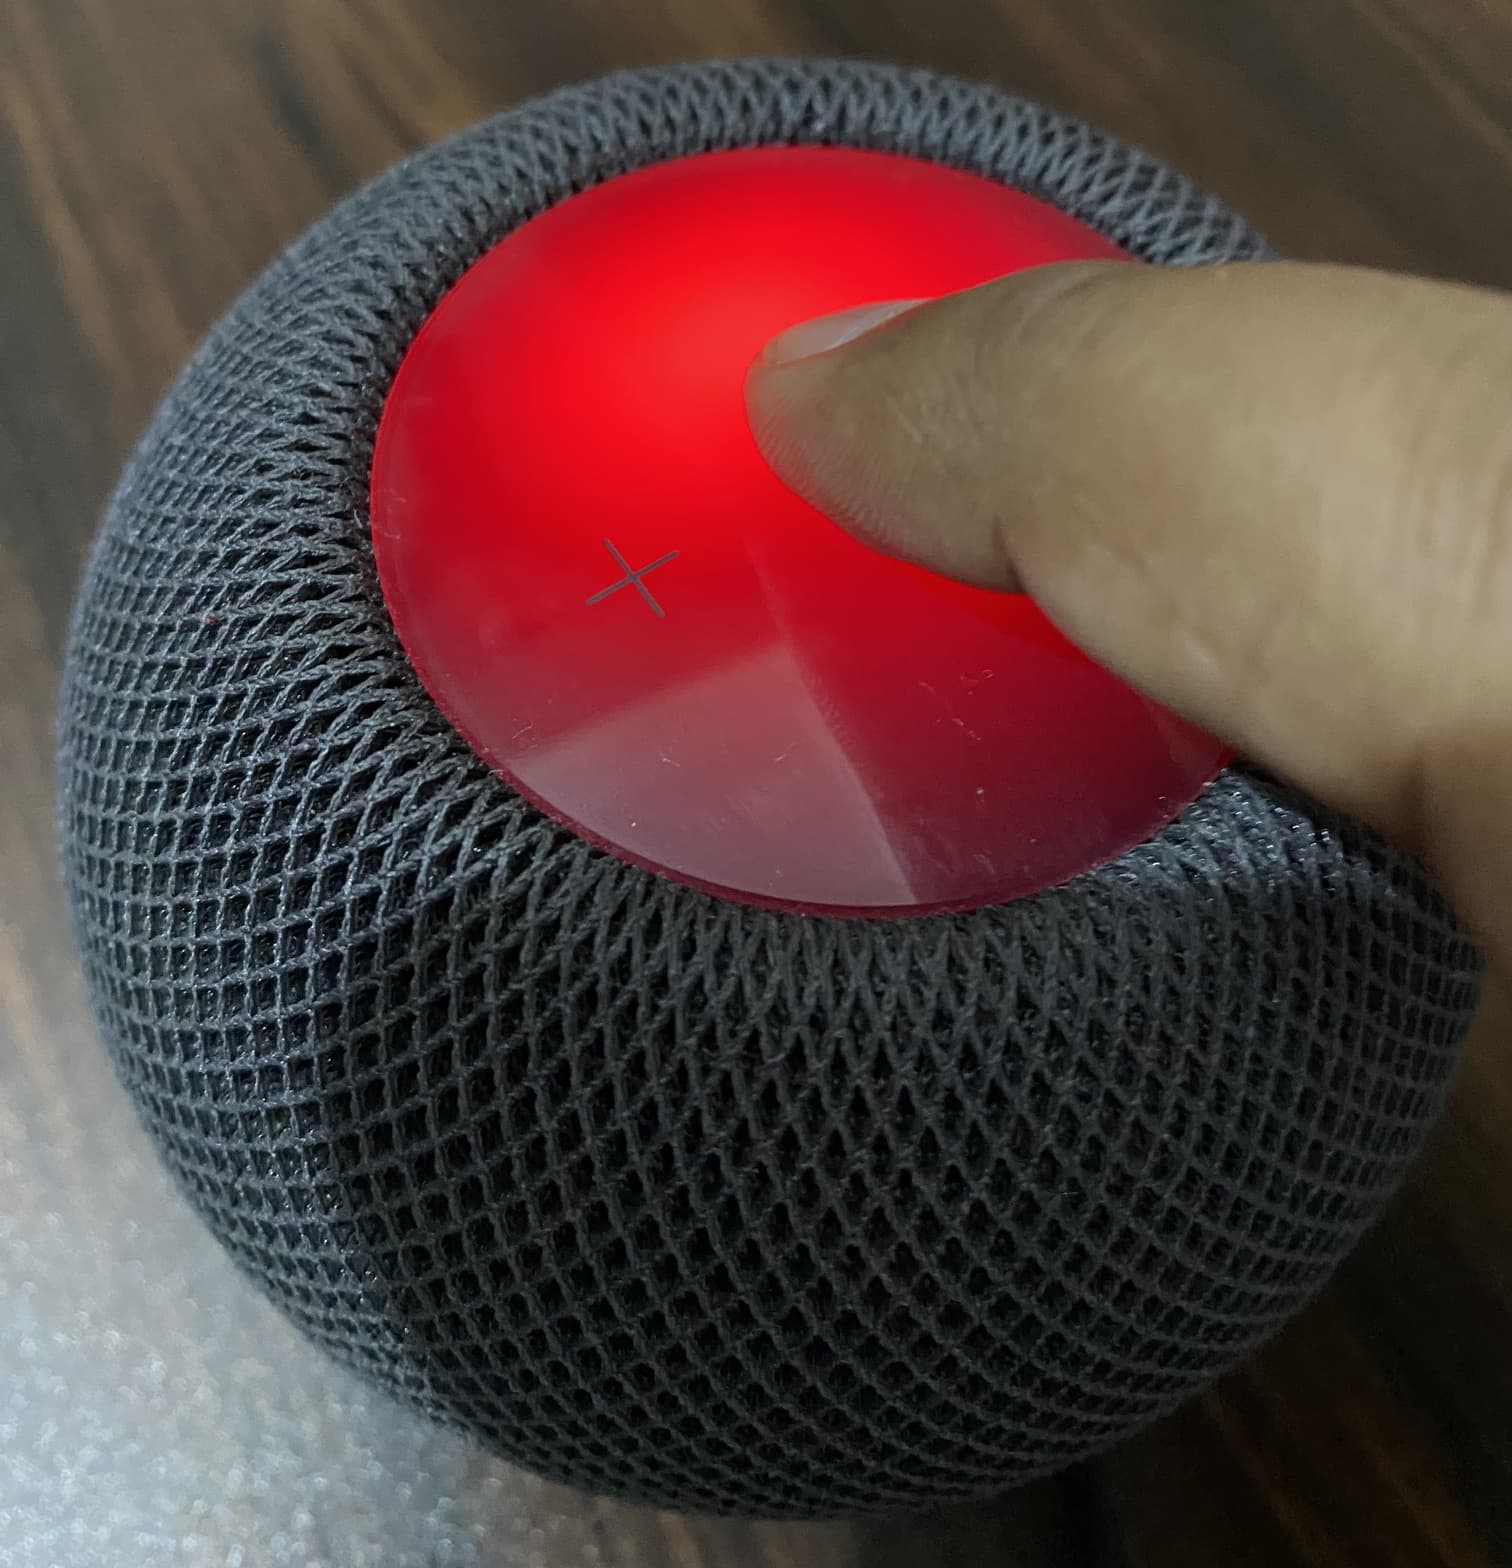 Red light on HomePod mini while resetting it